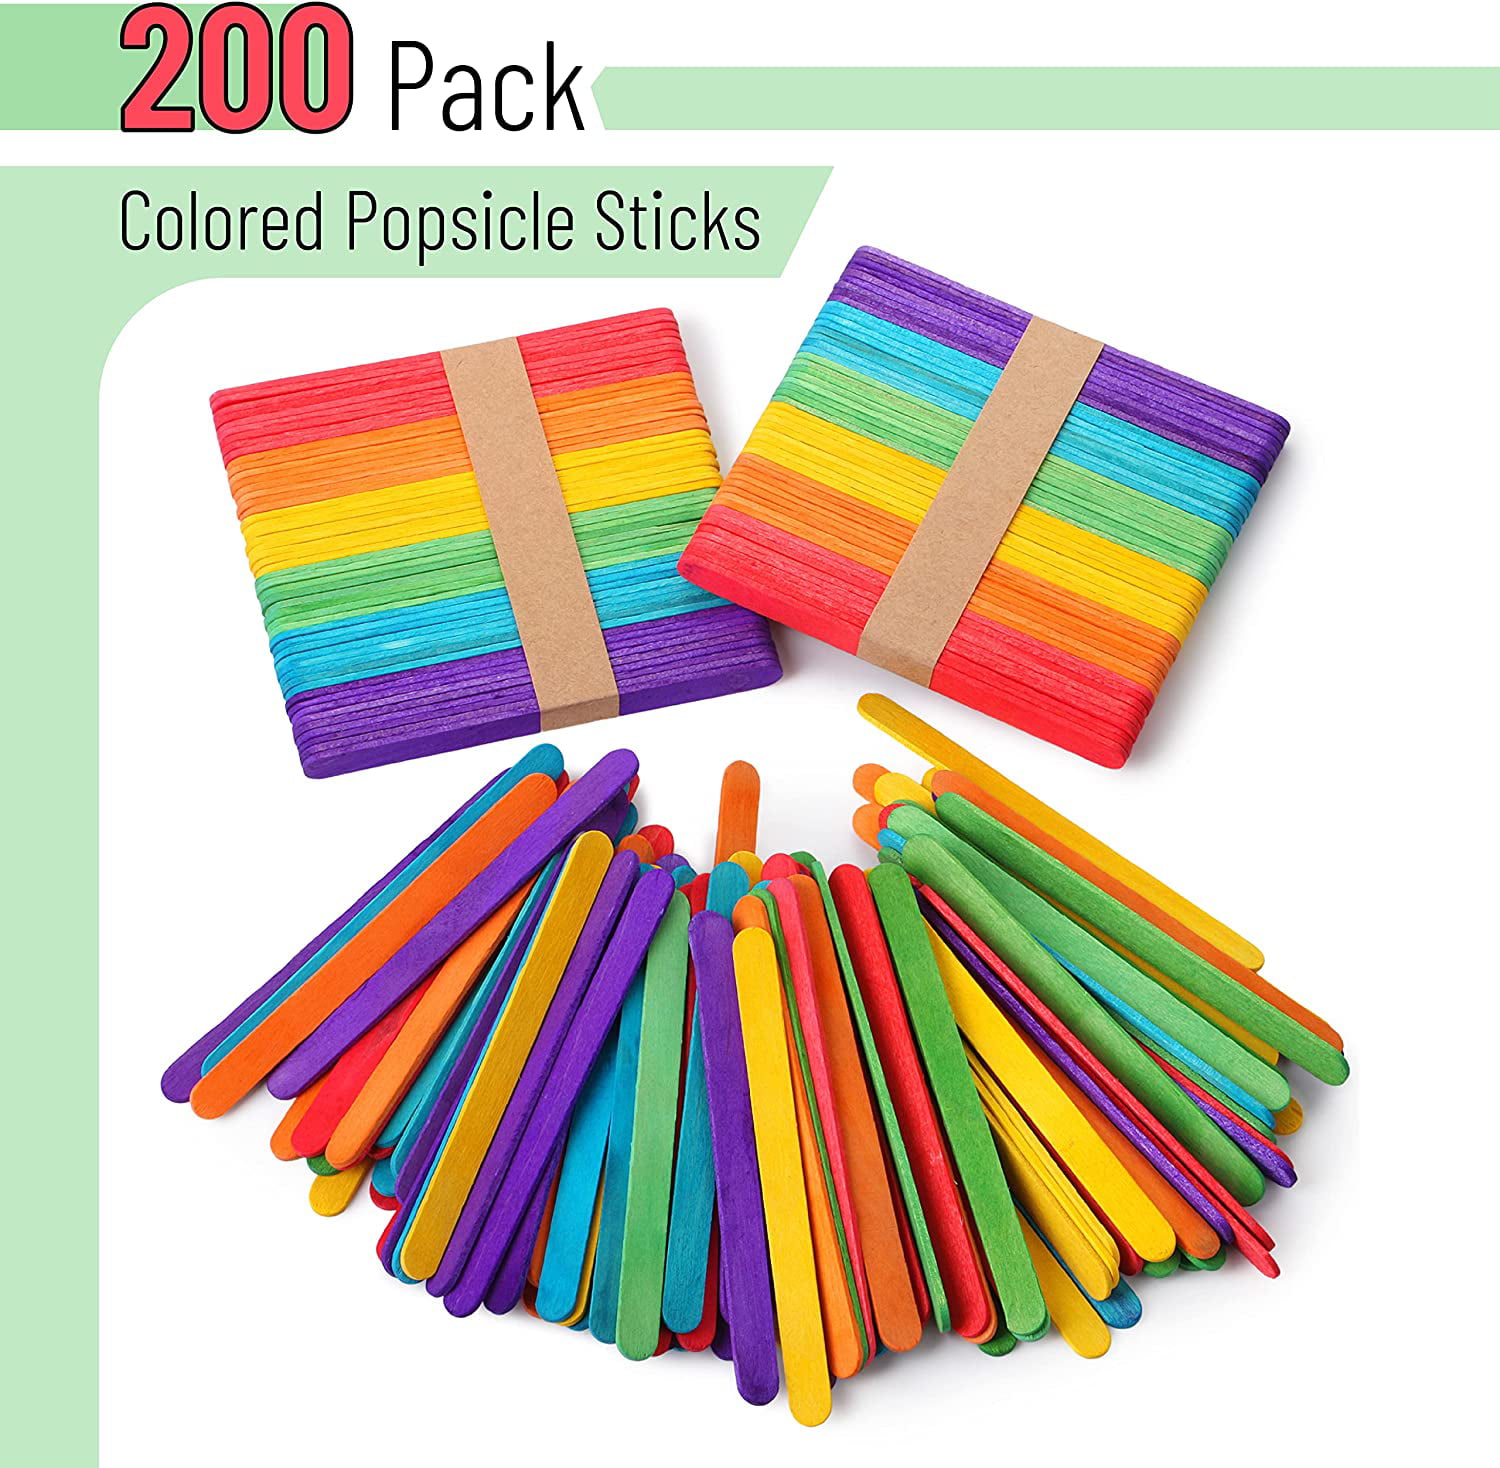 WISYOK 240 Pcs Colored Popsicle Sticks for Crafts, 4.5 inch Colored Wooden Craft Sticks, Ice Cream Sticks, Rainbow Popsicle Sticks, Great for DIY